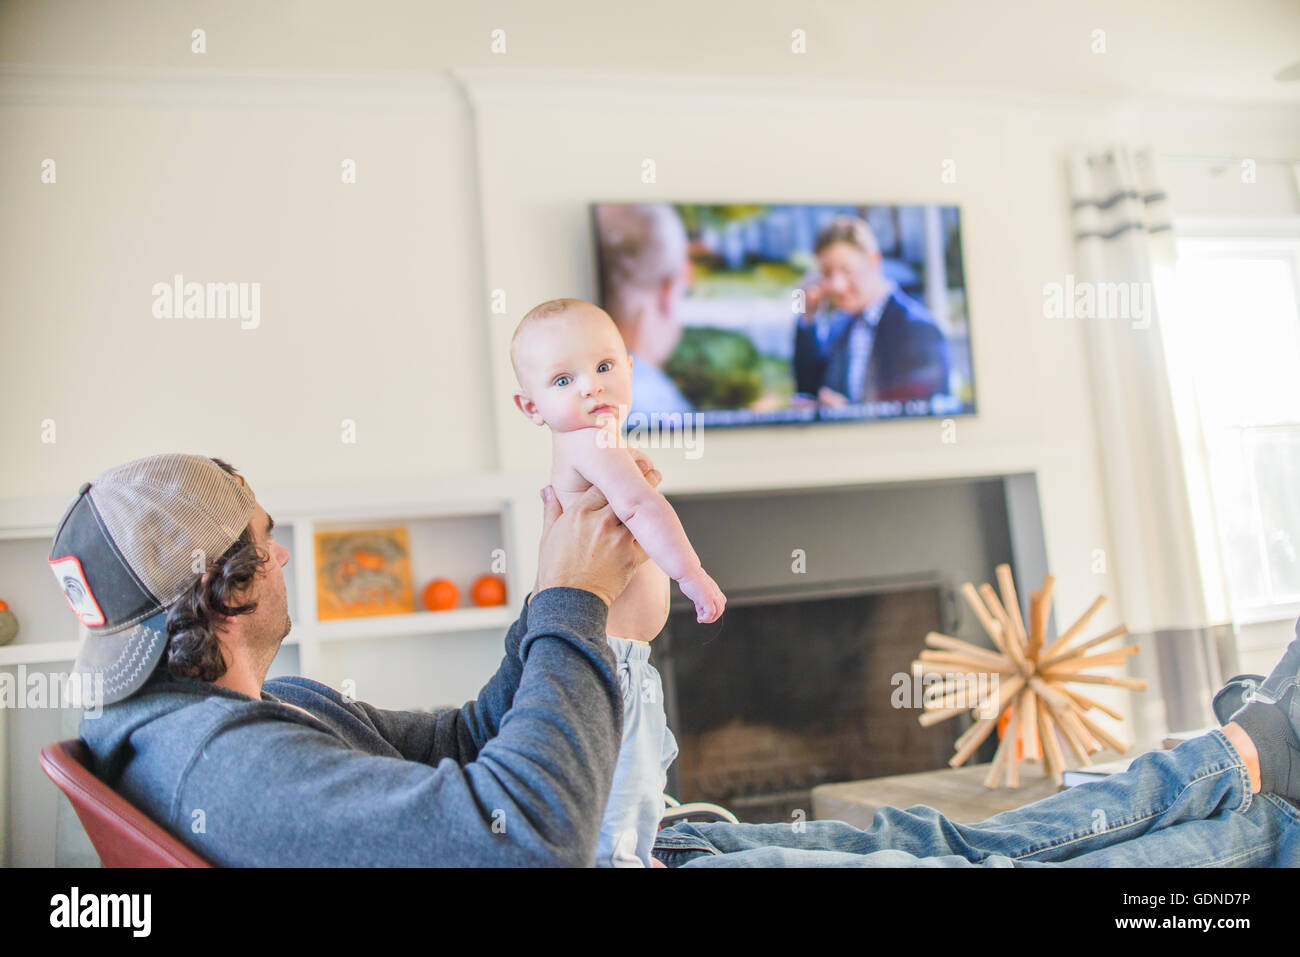 Father watching television holding baby boy Stock Photo